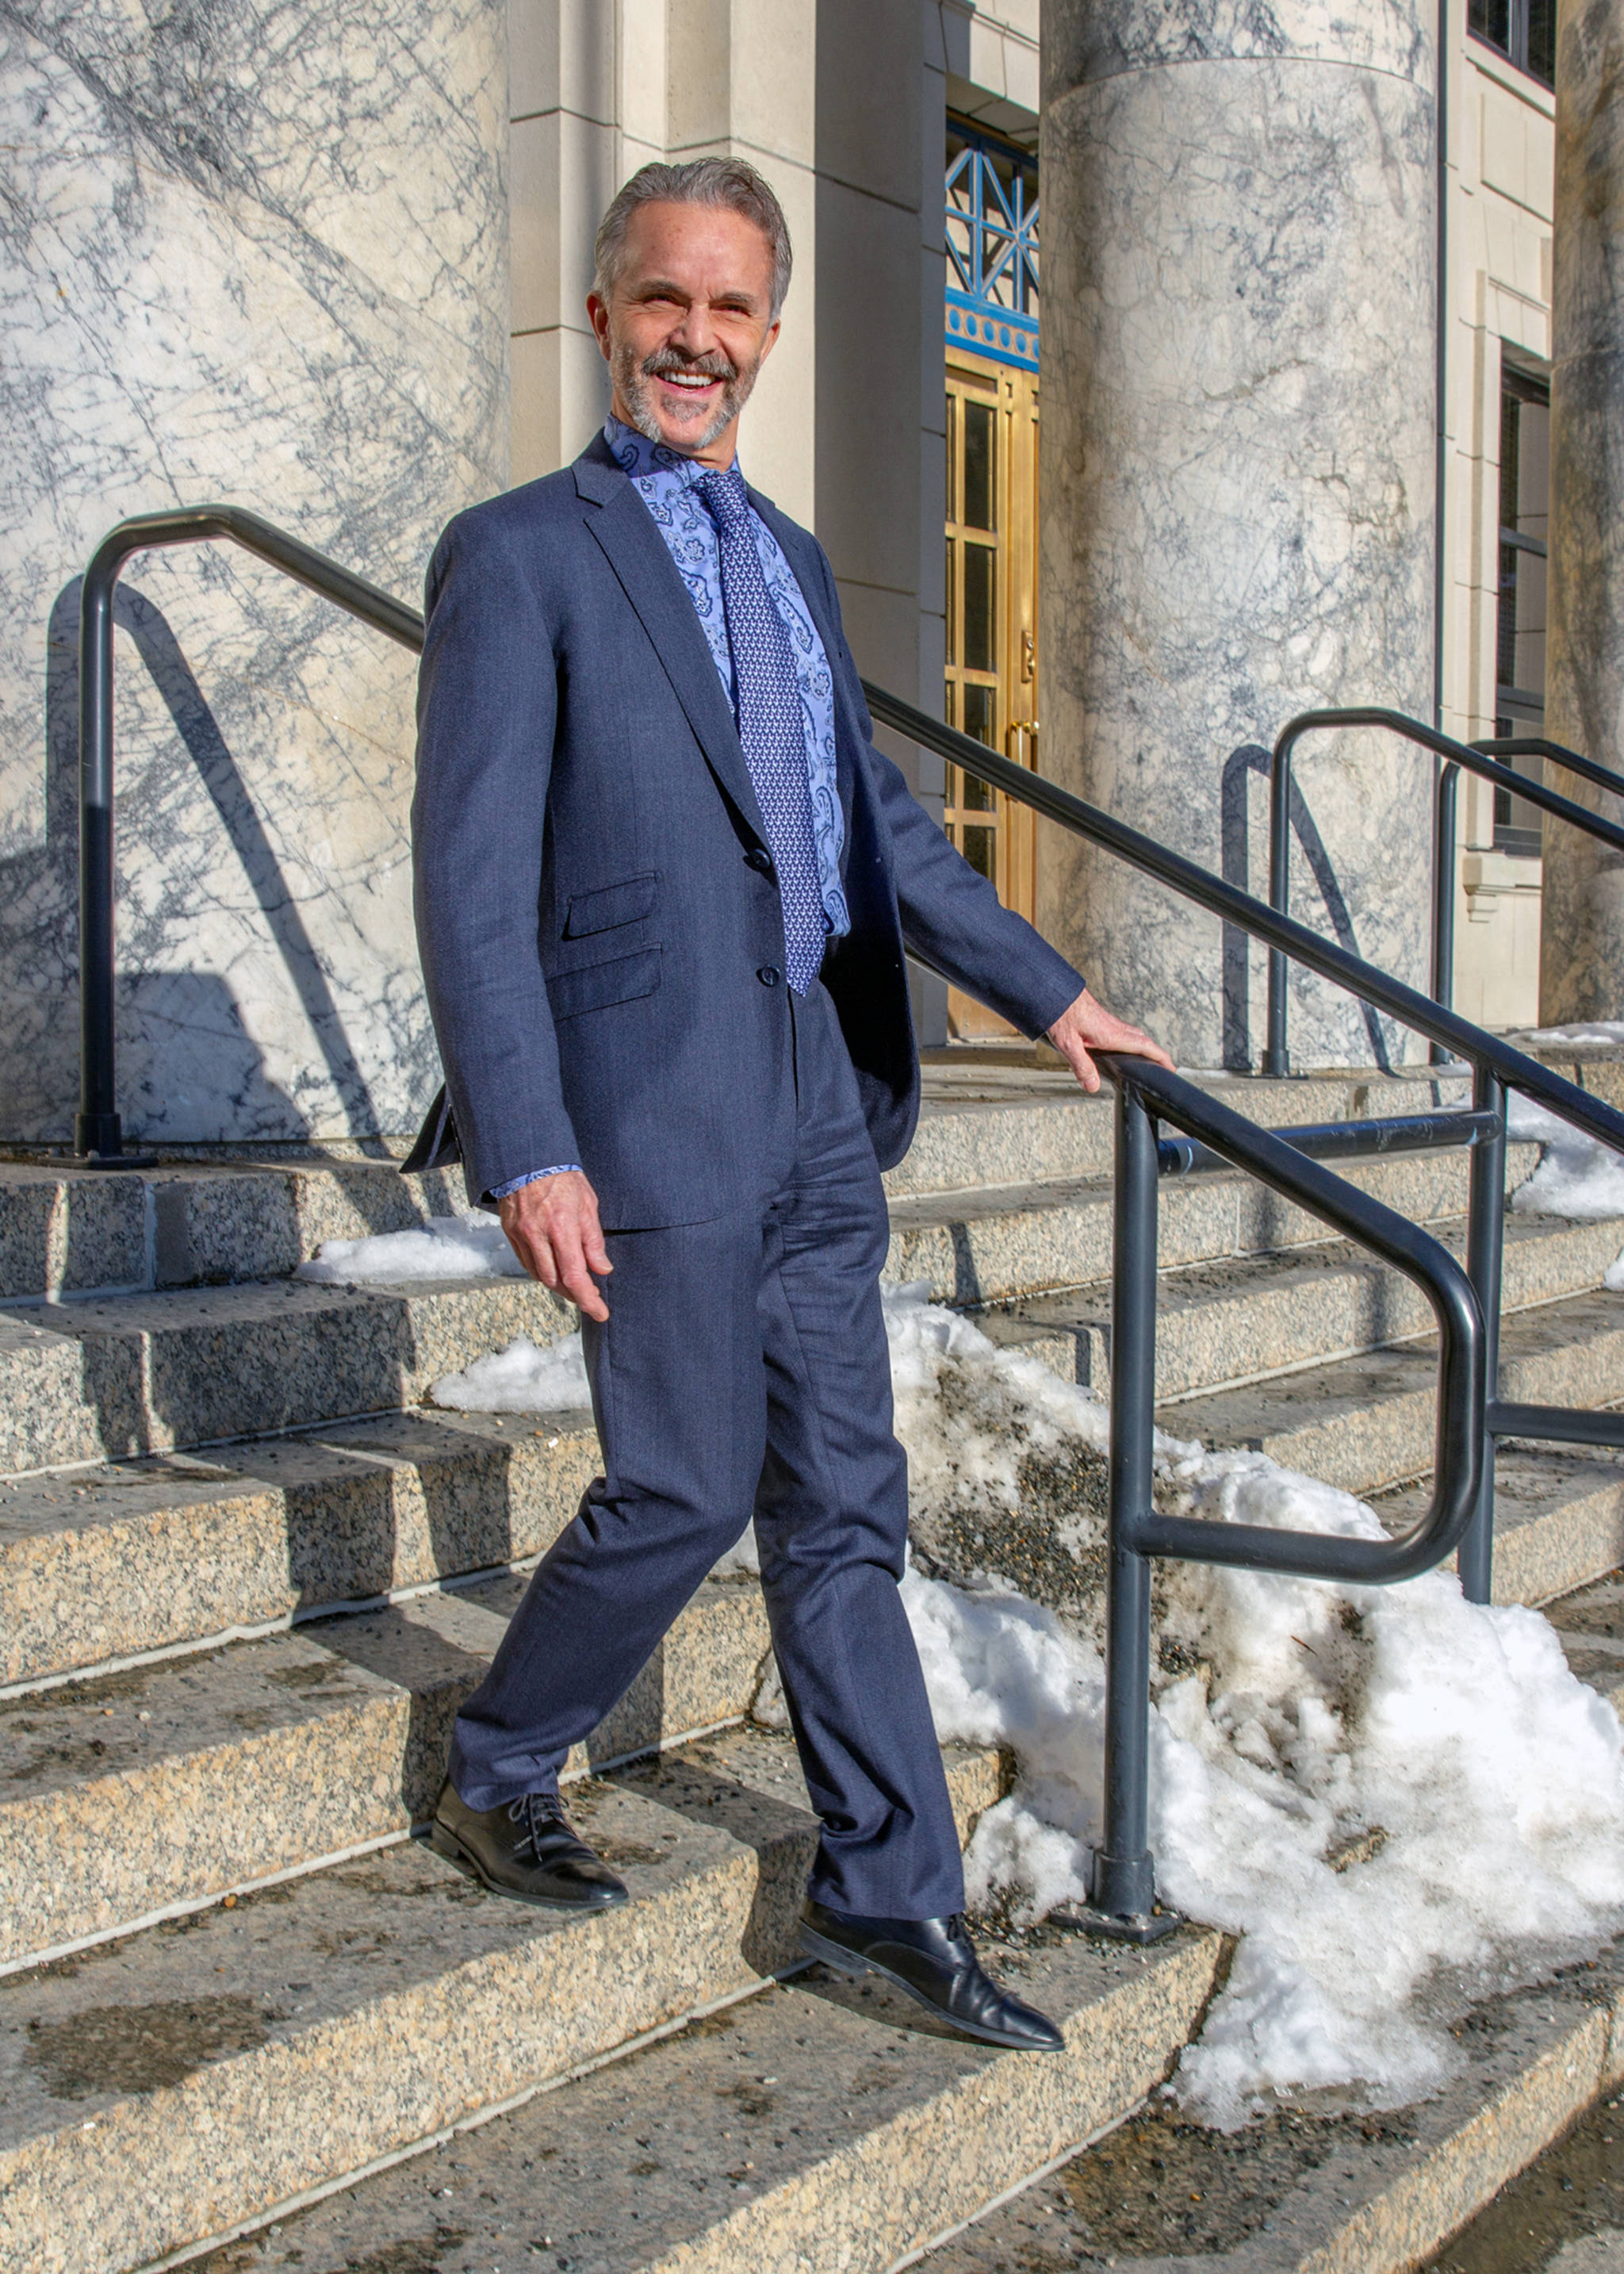 March 3, 2019: On the steps of the Capitol, Tom Atkinson, legislative staffer, cuts a fine form in his slim-cut wool suit from Trend Maxman. His suit coordinates impeccably with his cotton paisley shirt by Nordstrom, Italian silk neck tie from Andrew’s Ties and Brunomagli shoes, also made it Italy. (Kerry Howard | For the Juneau Empire)